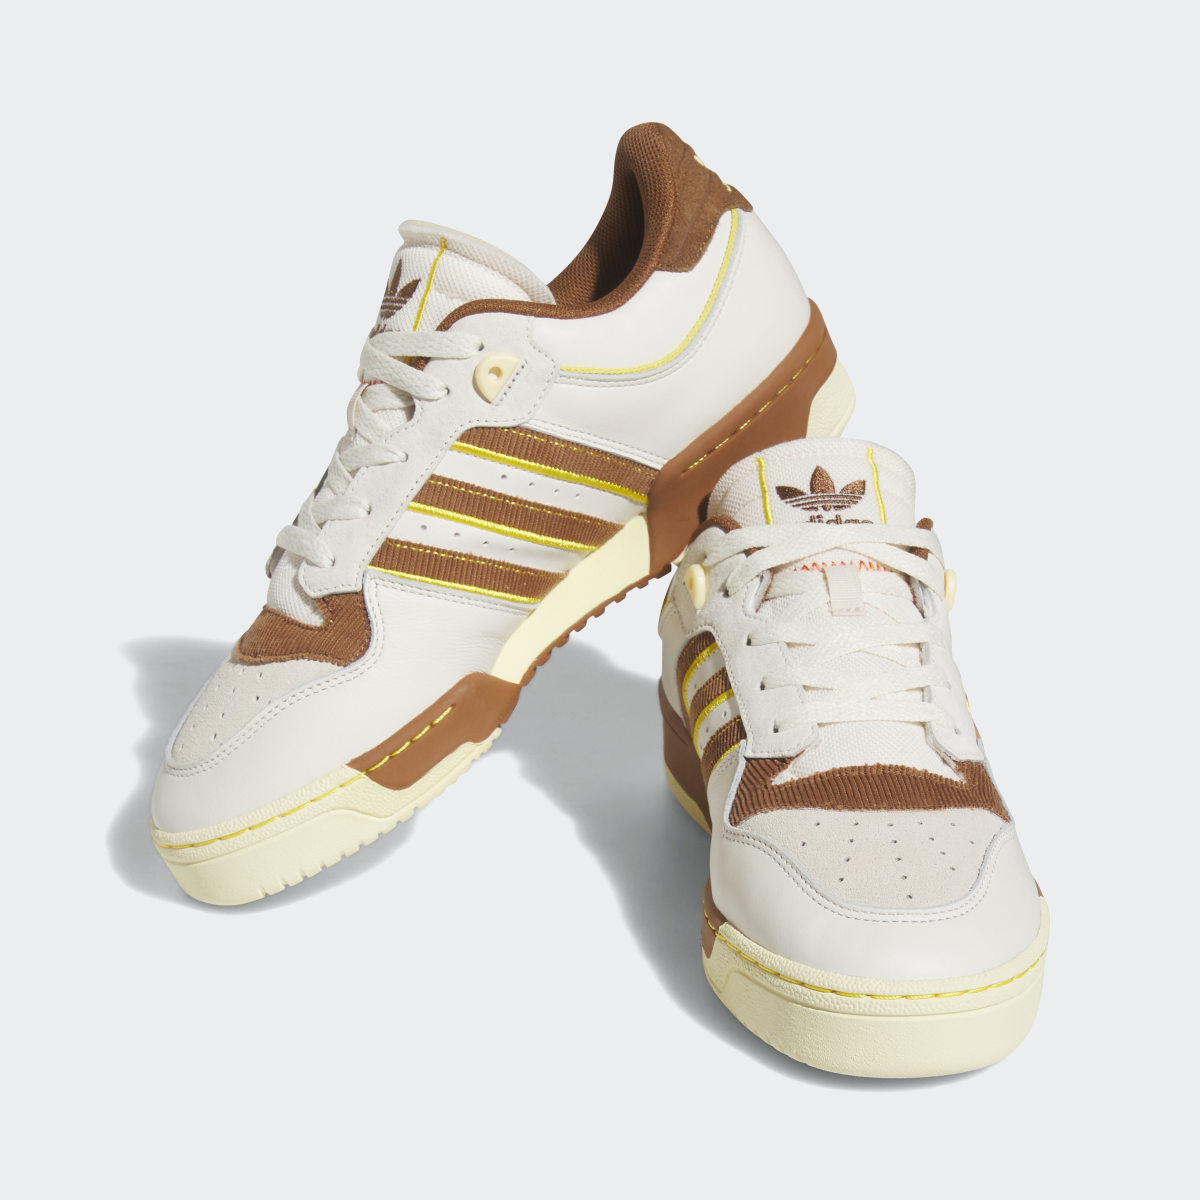 Adidas Rivalry Low 86 Shoes. 5